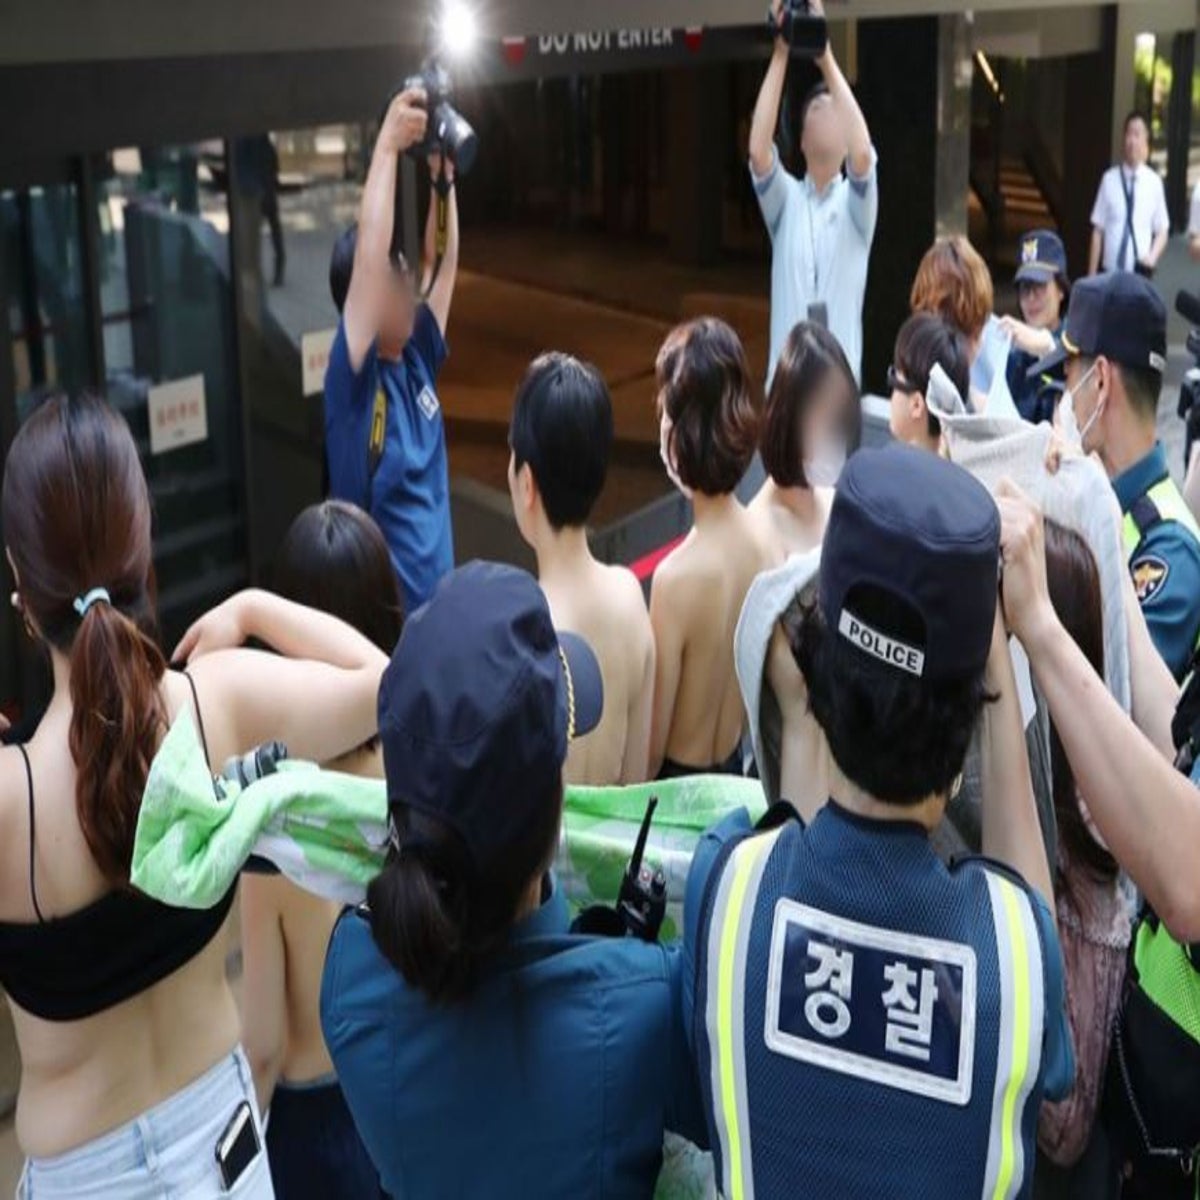 Women stage topless protest over Facebook 'discrimination' in South Korea |  The Independent | The Independent